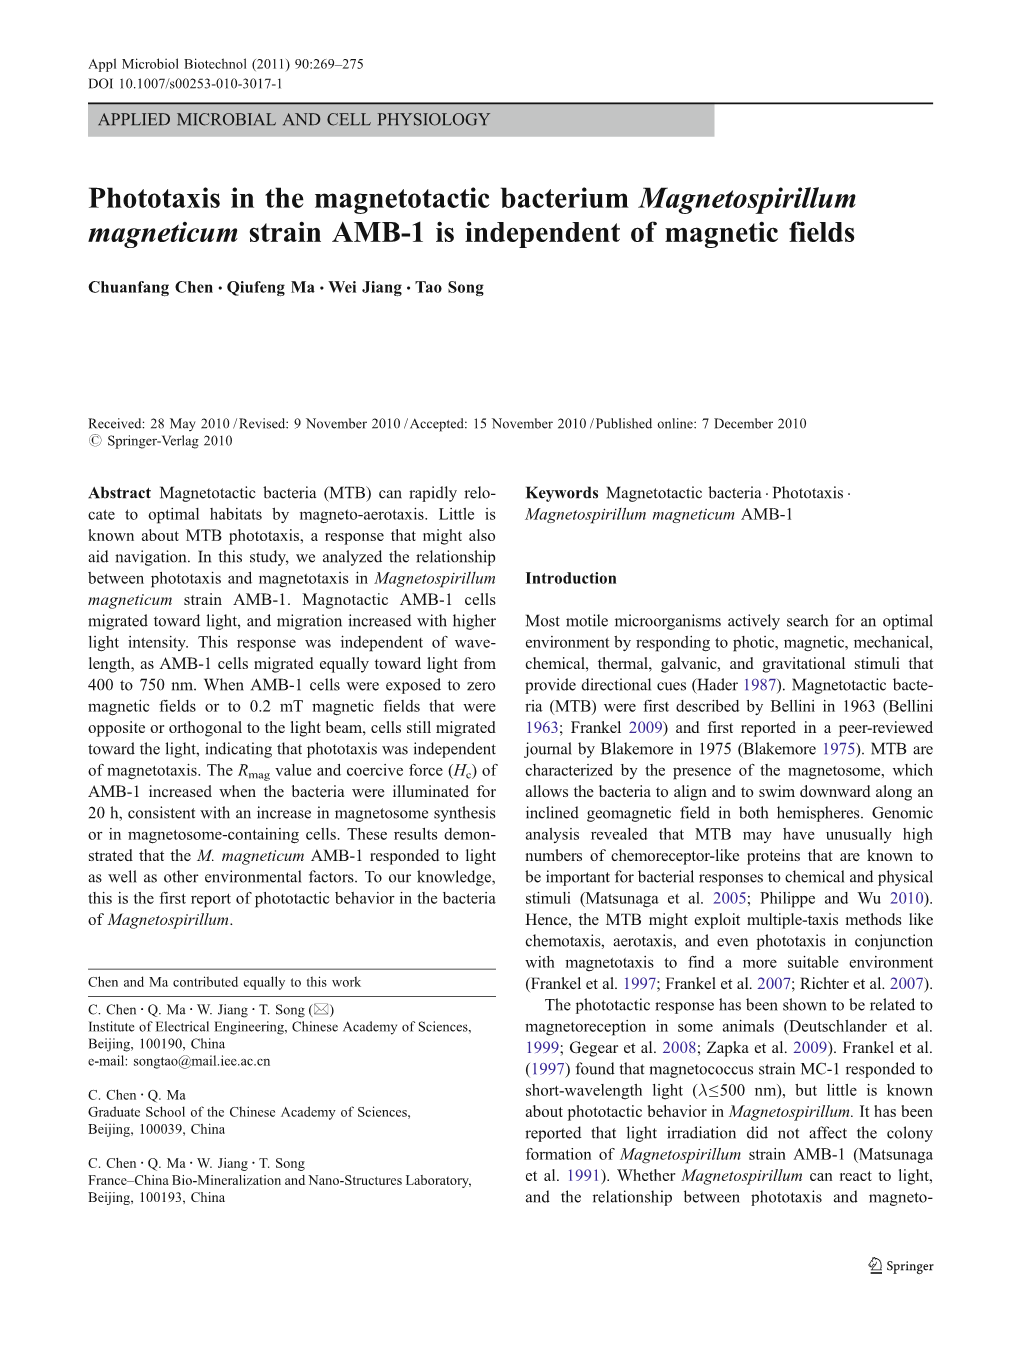 Phototaxis in the Magnetotactic Bacterium Magnetospirillum Magneticum Strain AMB-1 Is Independent of Magnetic Fields